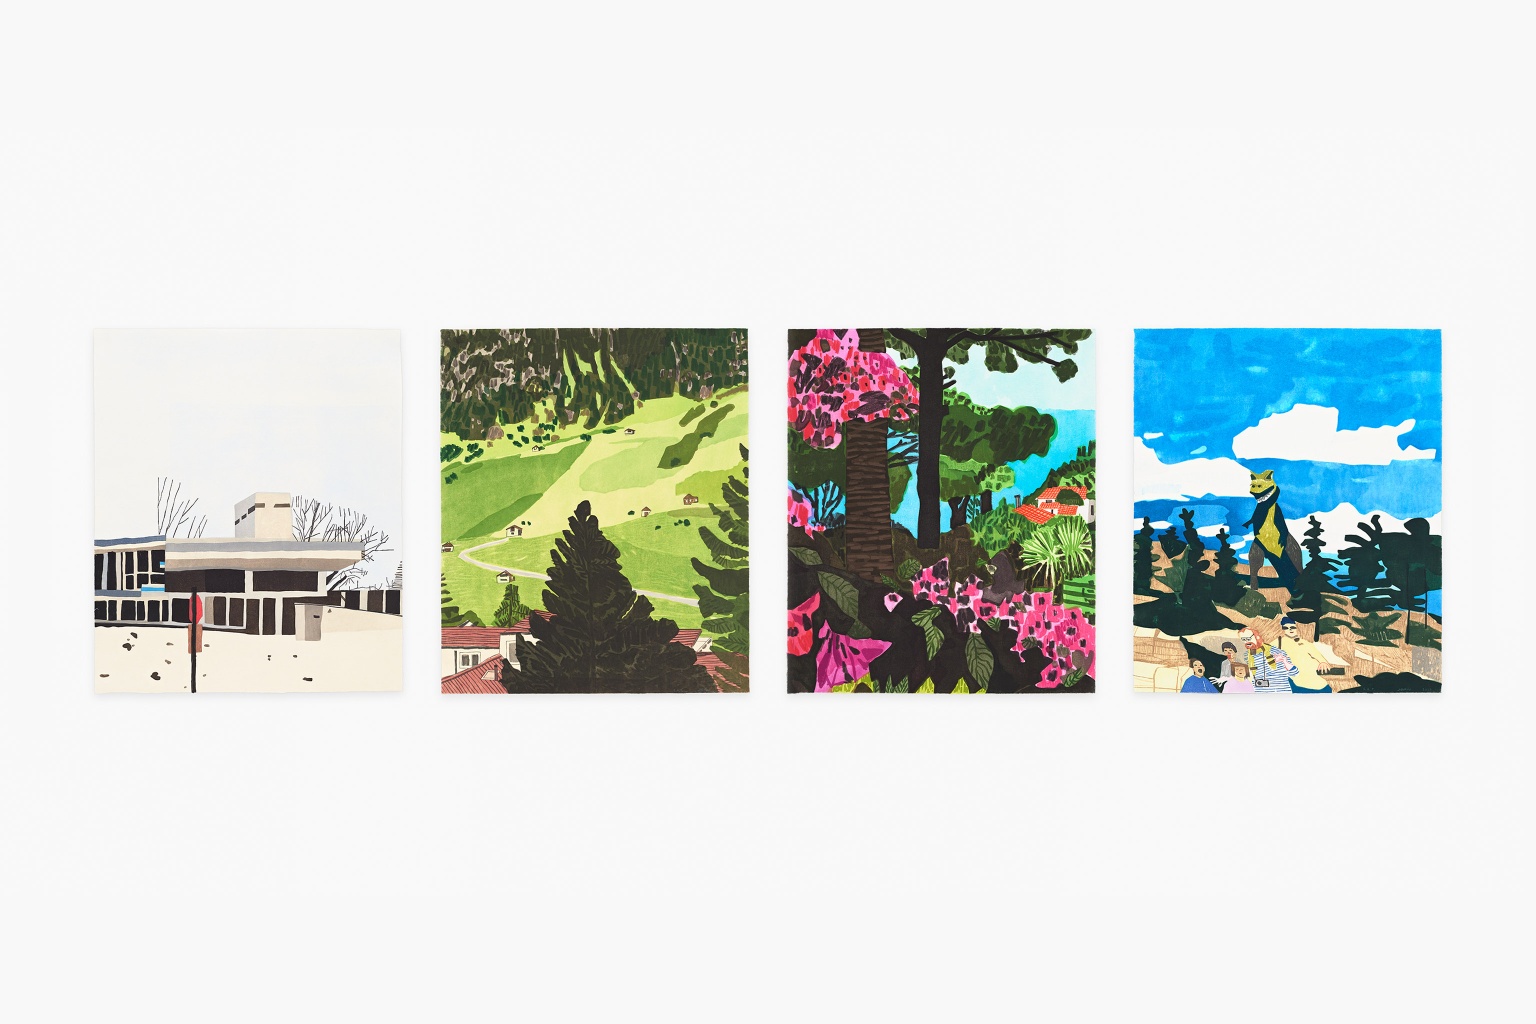 "Four Landscapes" (2020) by Jonas Wood